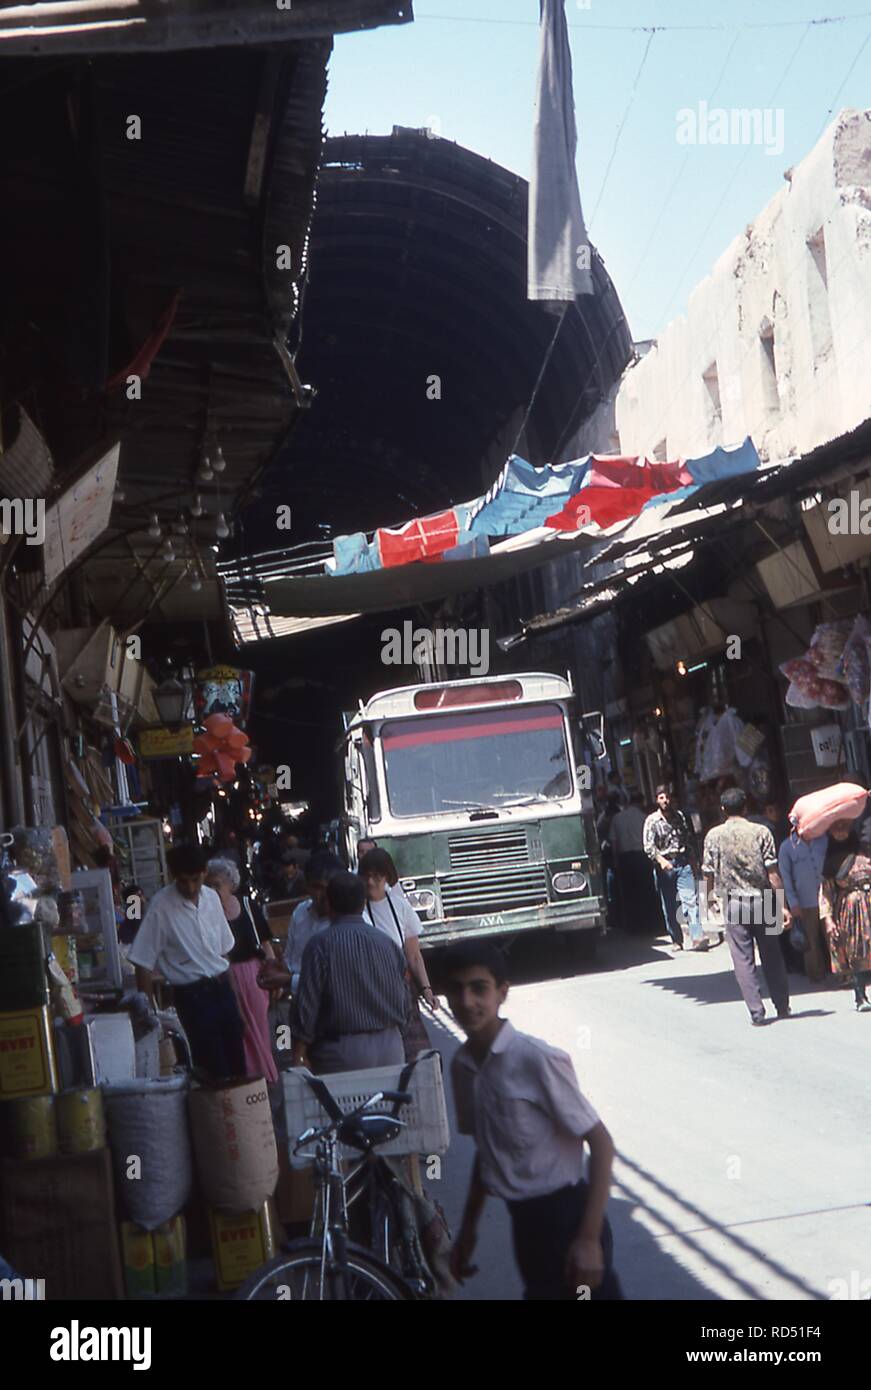 View of a busy street scene at the entrance to Al Hamidiyah souk in Damascus, Syria, June, 1994. At center a city bus travels through the market as shoppers swarm the alley's stalls. () Stock Photo